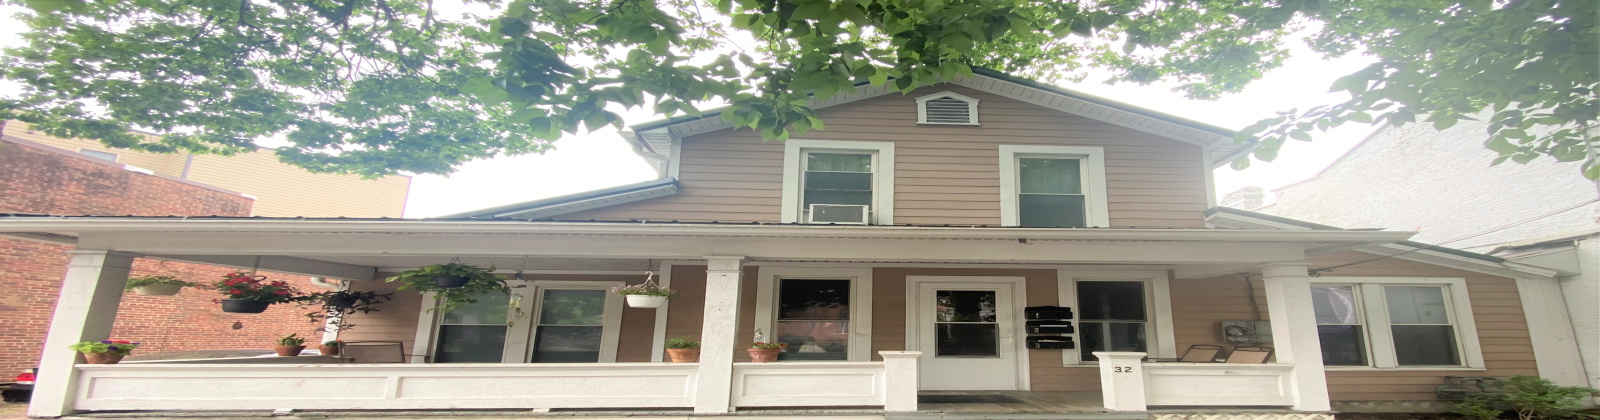 32 E State St APT 2 Athens, Ohio 45701, 1 Bedroom Bedrooms, ,1 BathroomBathrooms,Apartment,For Rent,E State St,1078